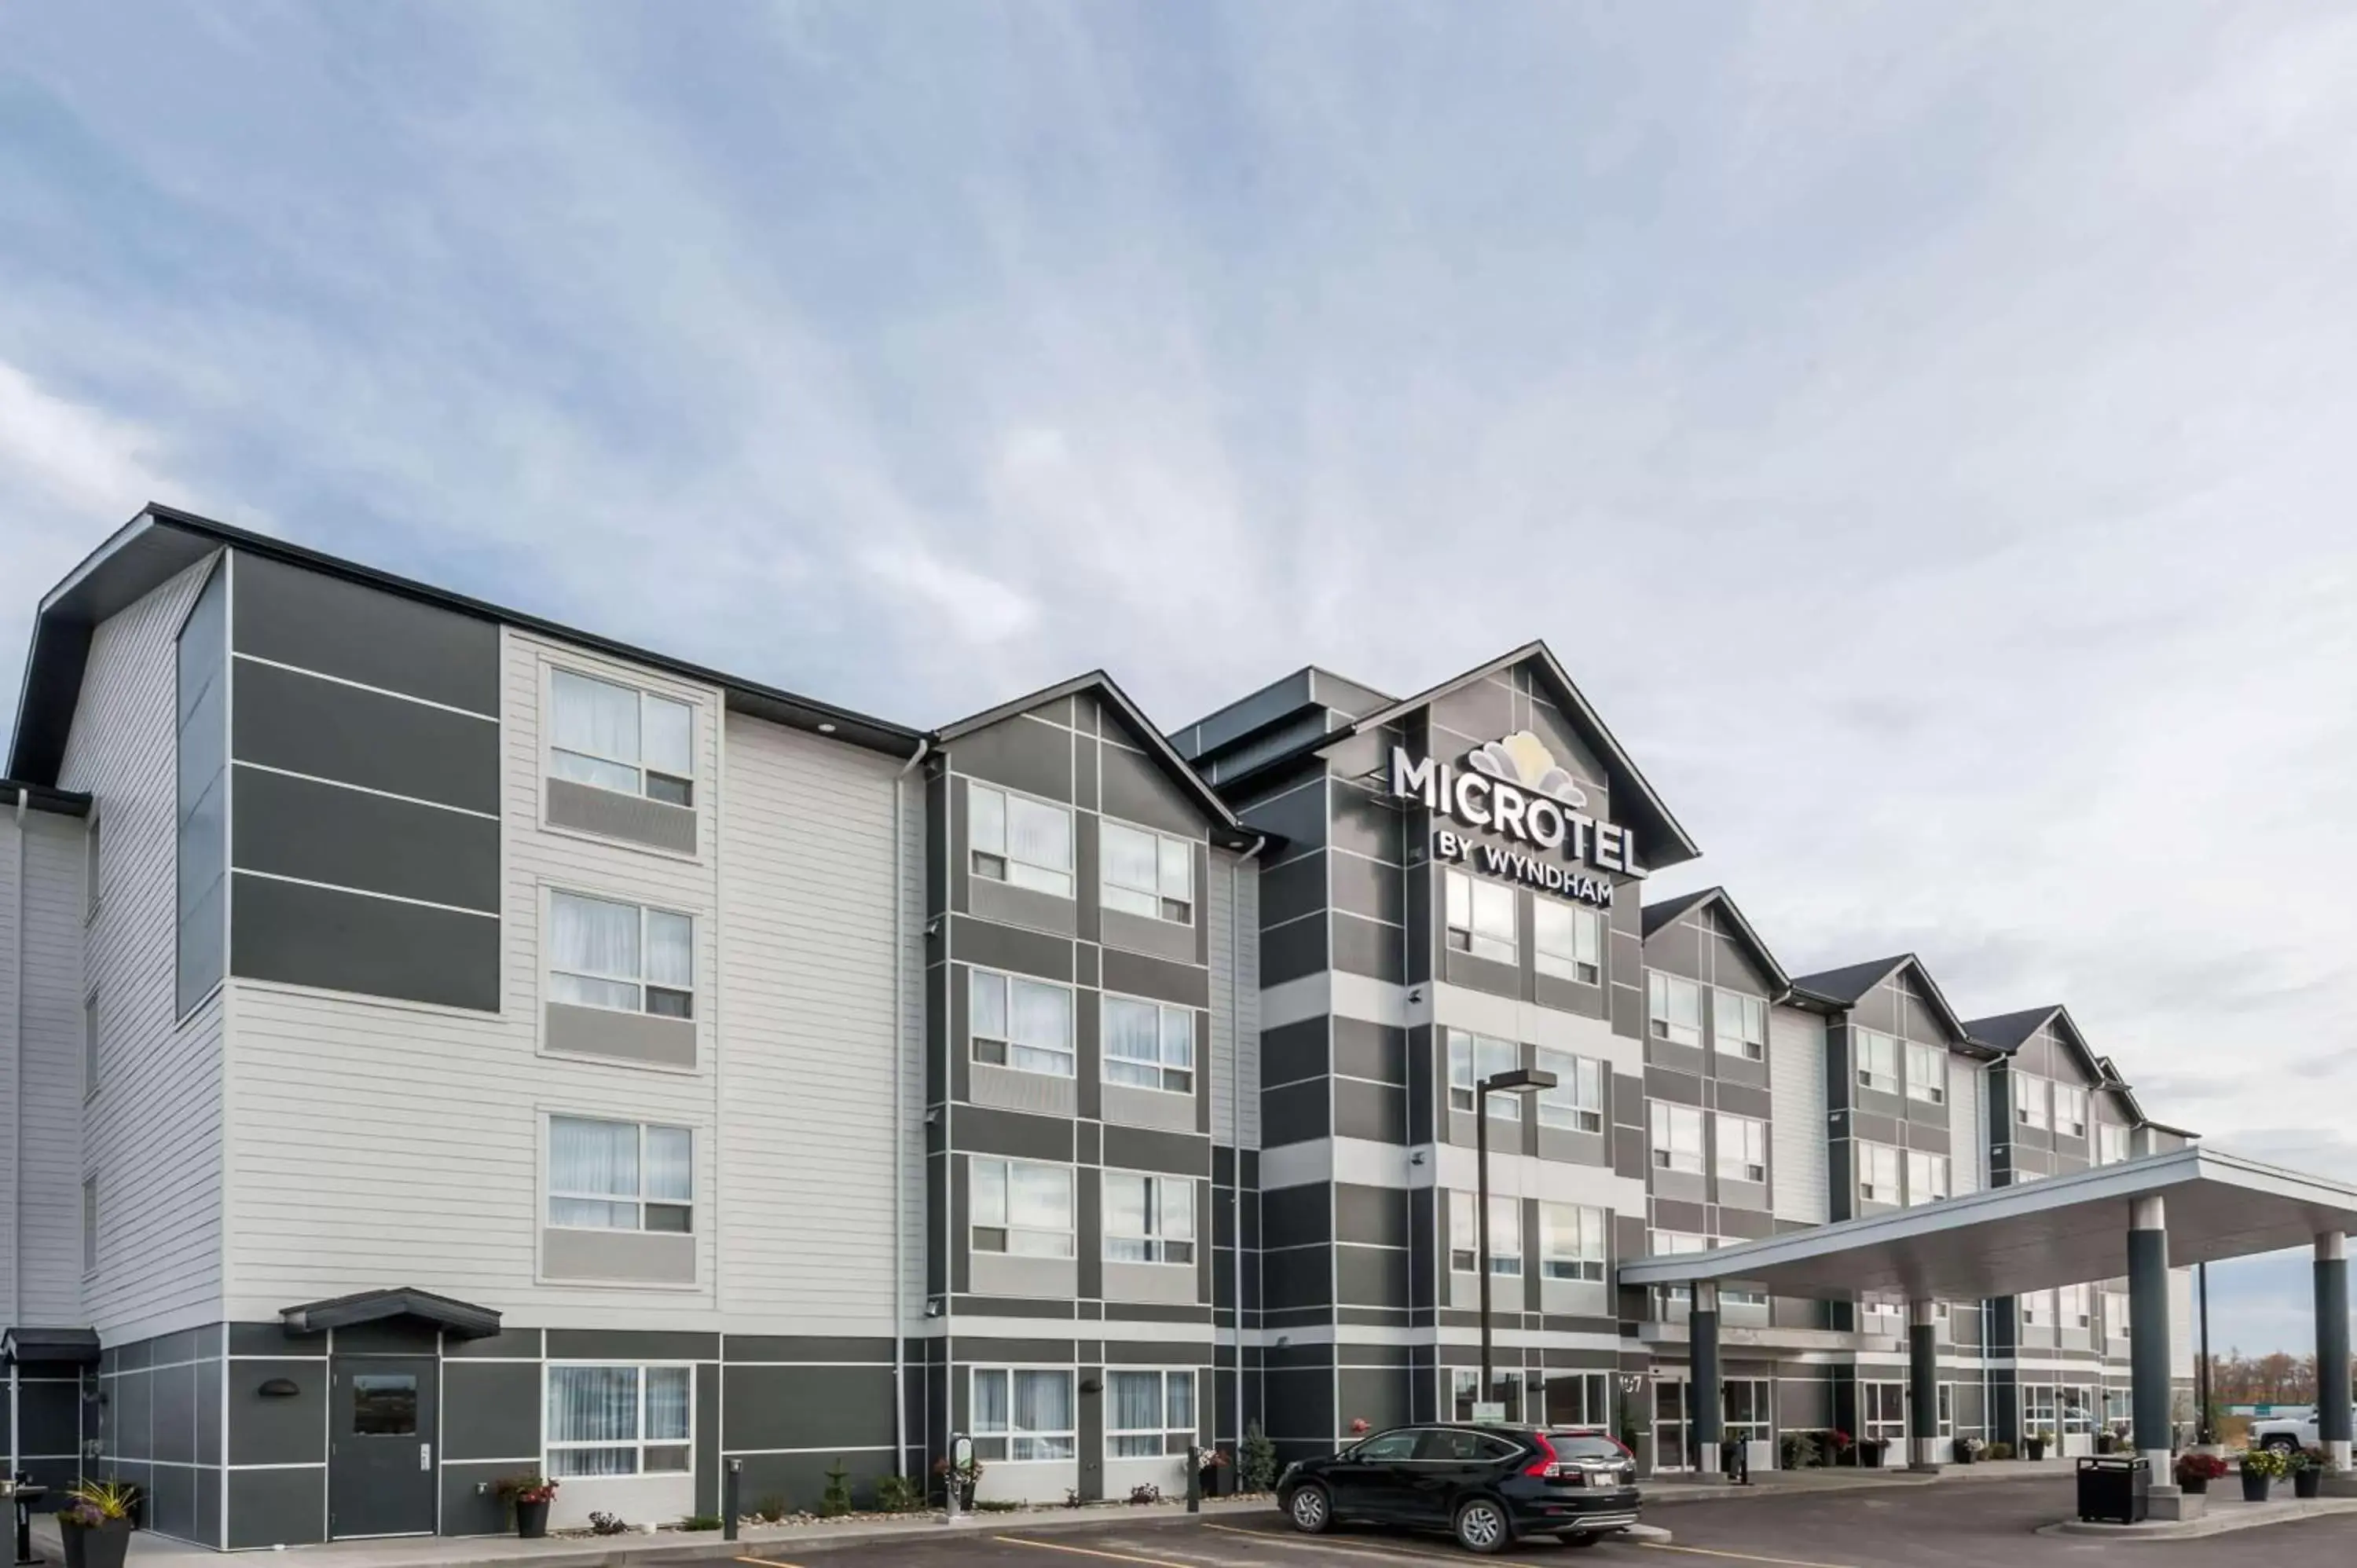 Property building in Microtel Inn & Suites by Wyndham Bonnyville